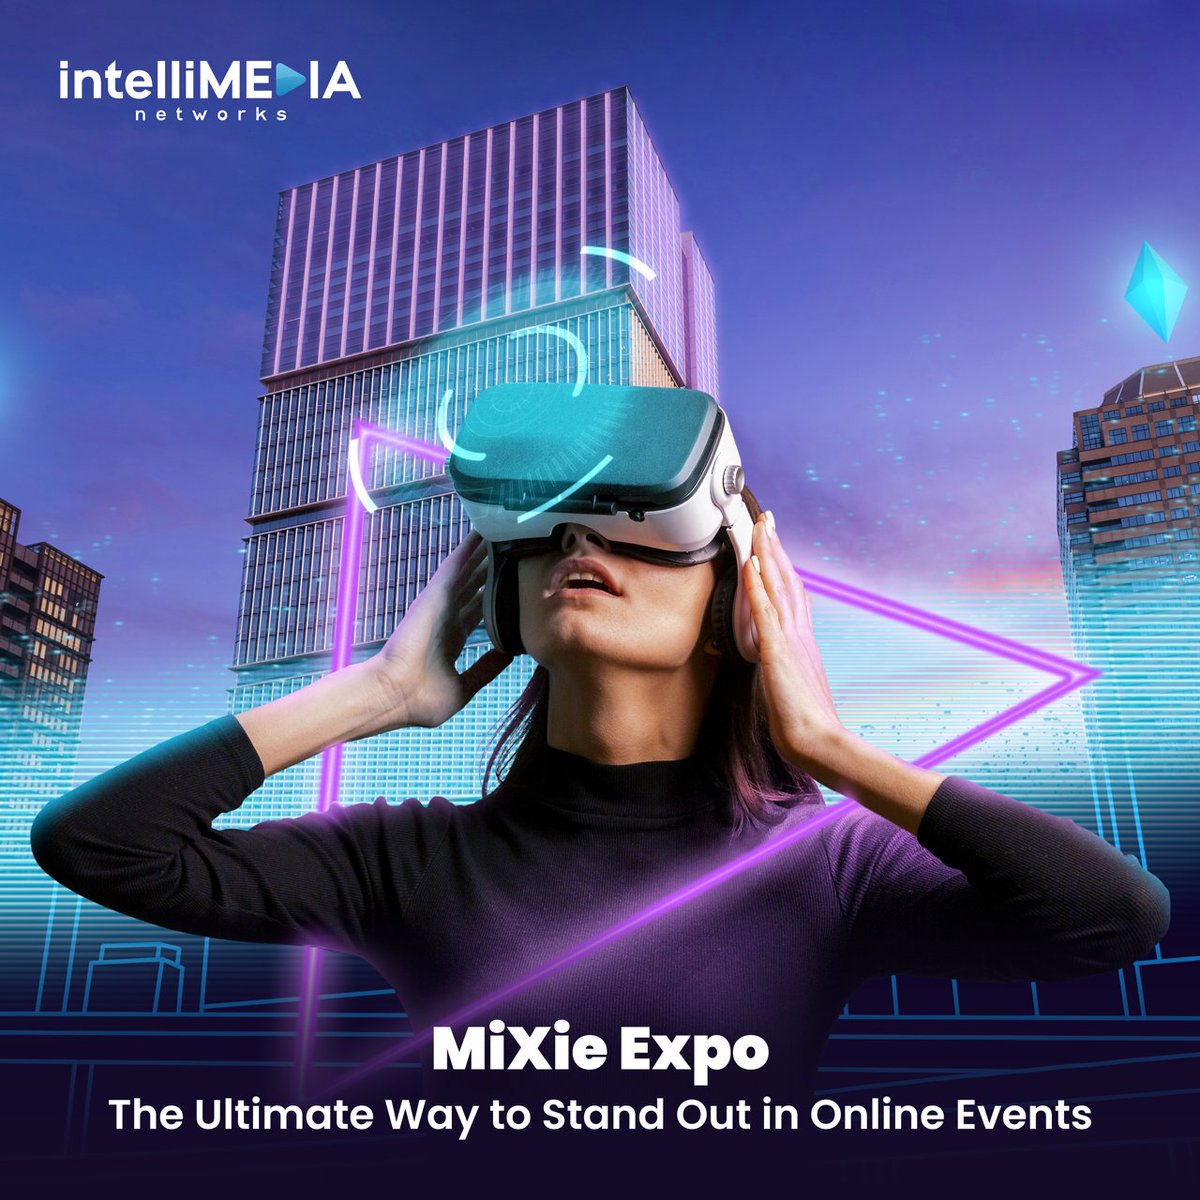 With MiXie Expo's custom booth options, you can make your #virtual #events truly unforgettable by delivering an immersive brand experience to your audience.
.
.
.
#tech #techworld #ca #US #USA #canada #unitedstates #mixiexpo #virtualeventplatform #OnlineExpo